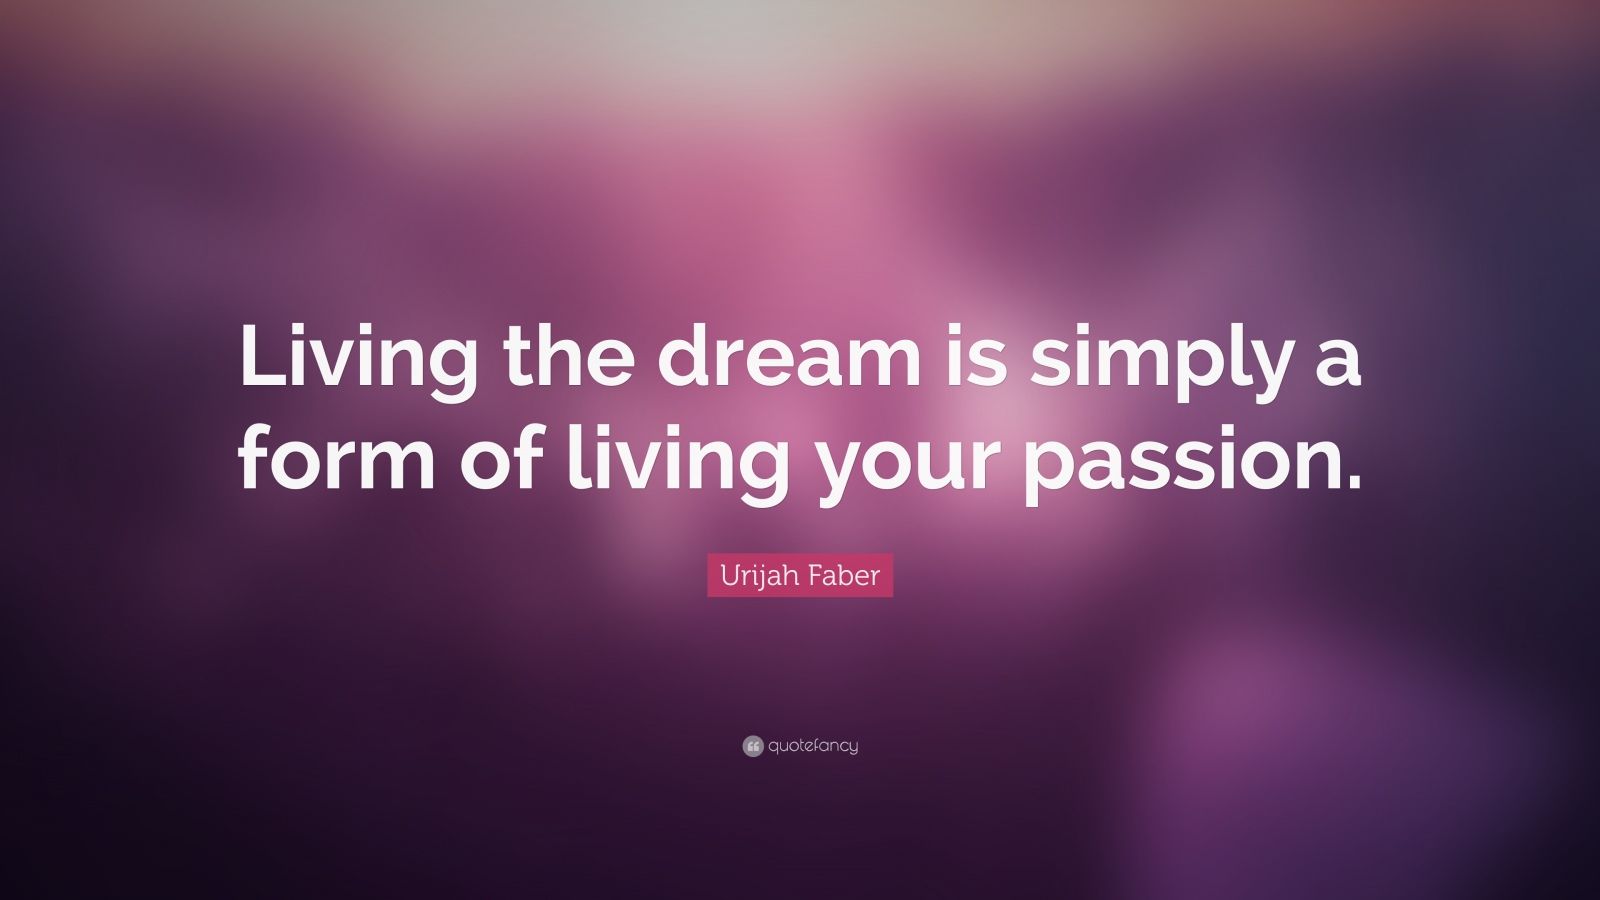 Urijah Faber Quote: “Living the dream is simply a form of living your